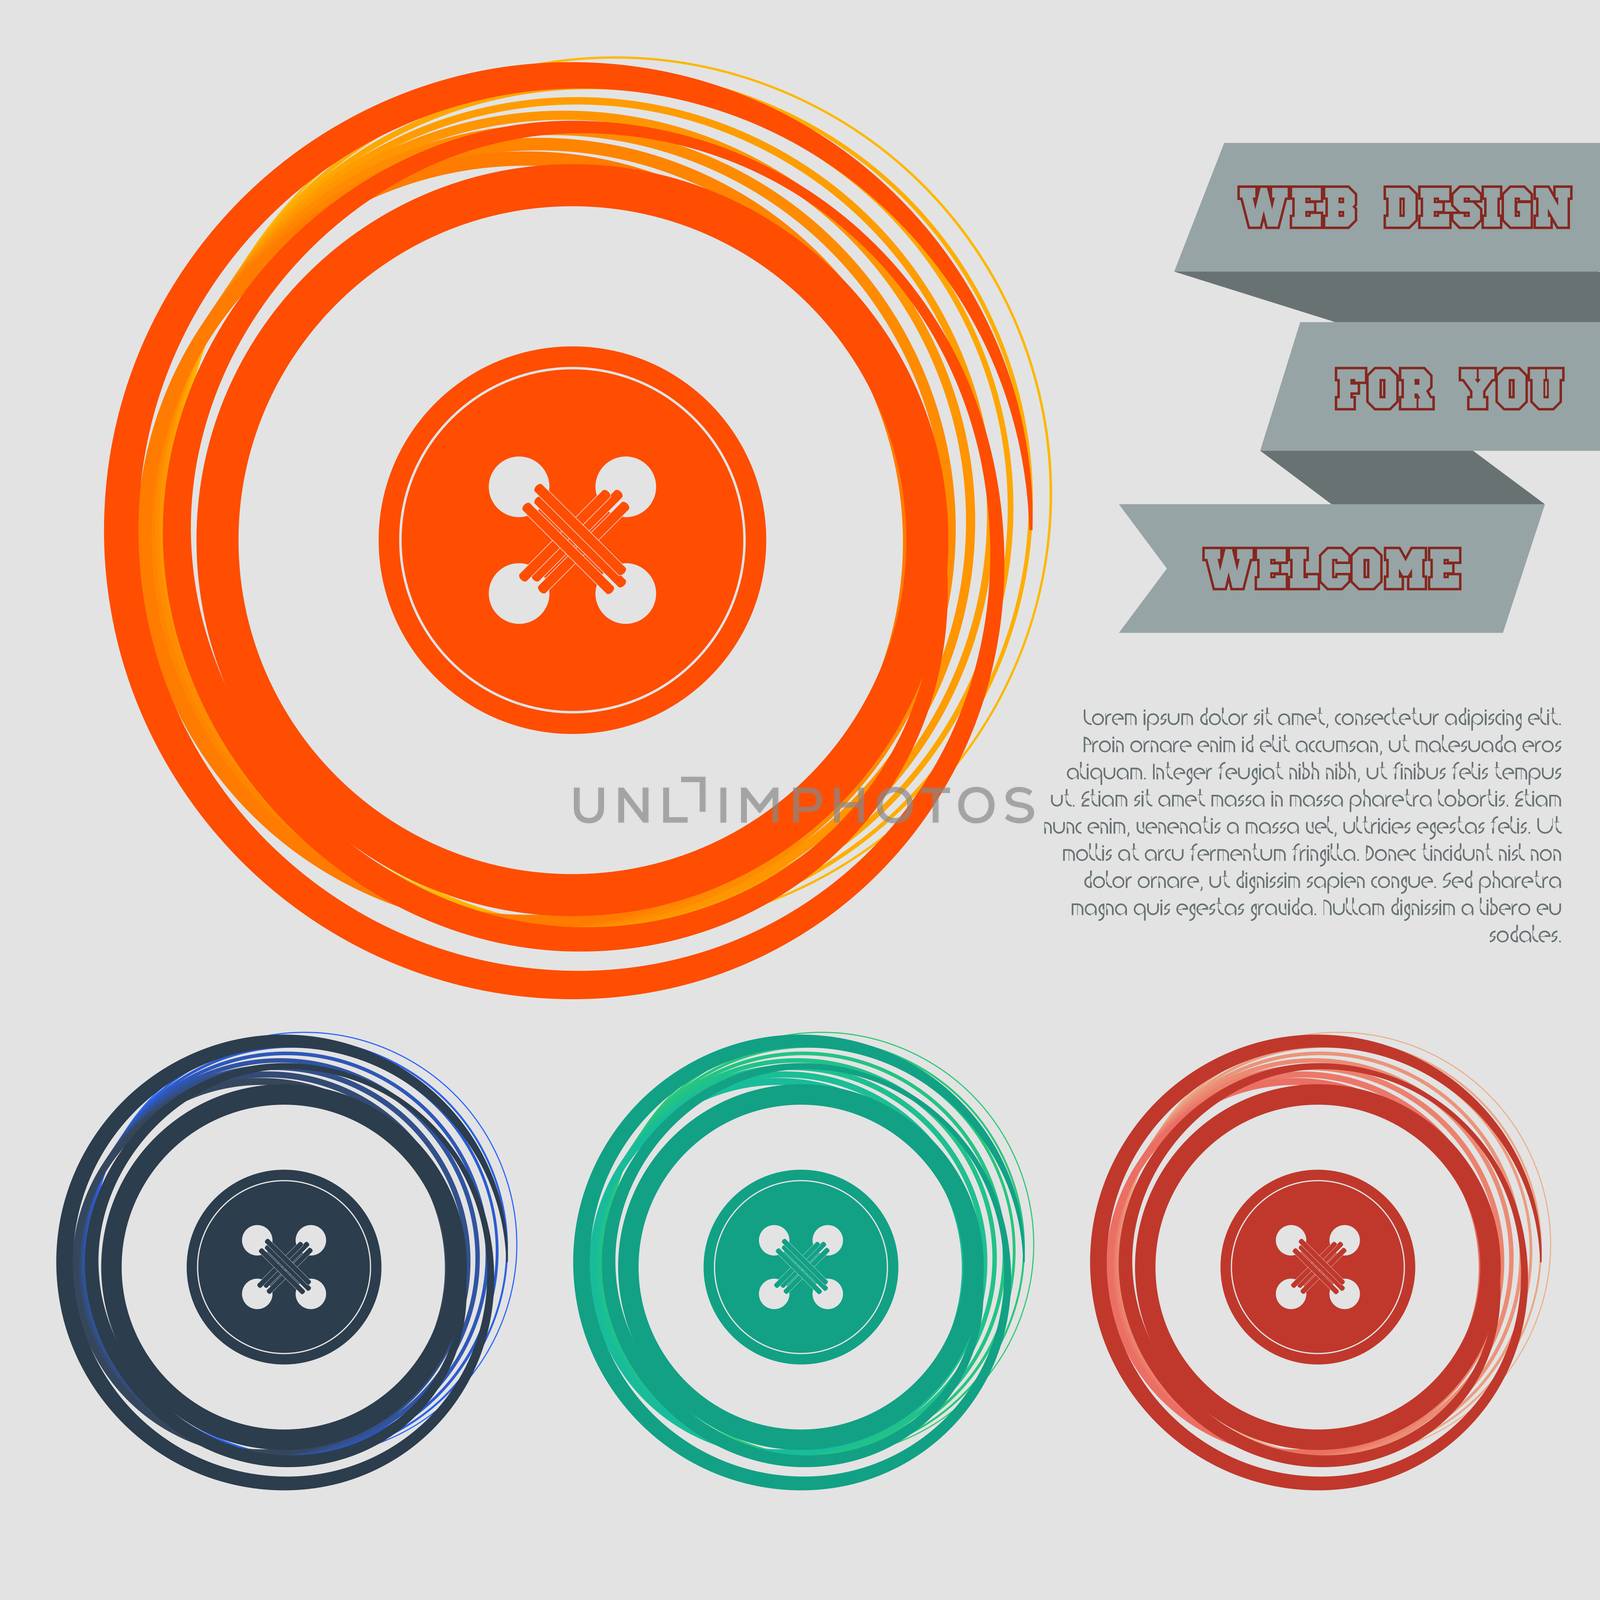 button for clothes icon on the red, blue, green, orange buttons for your website and design with space text.  by Adamchuk